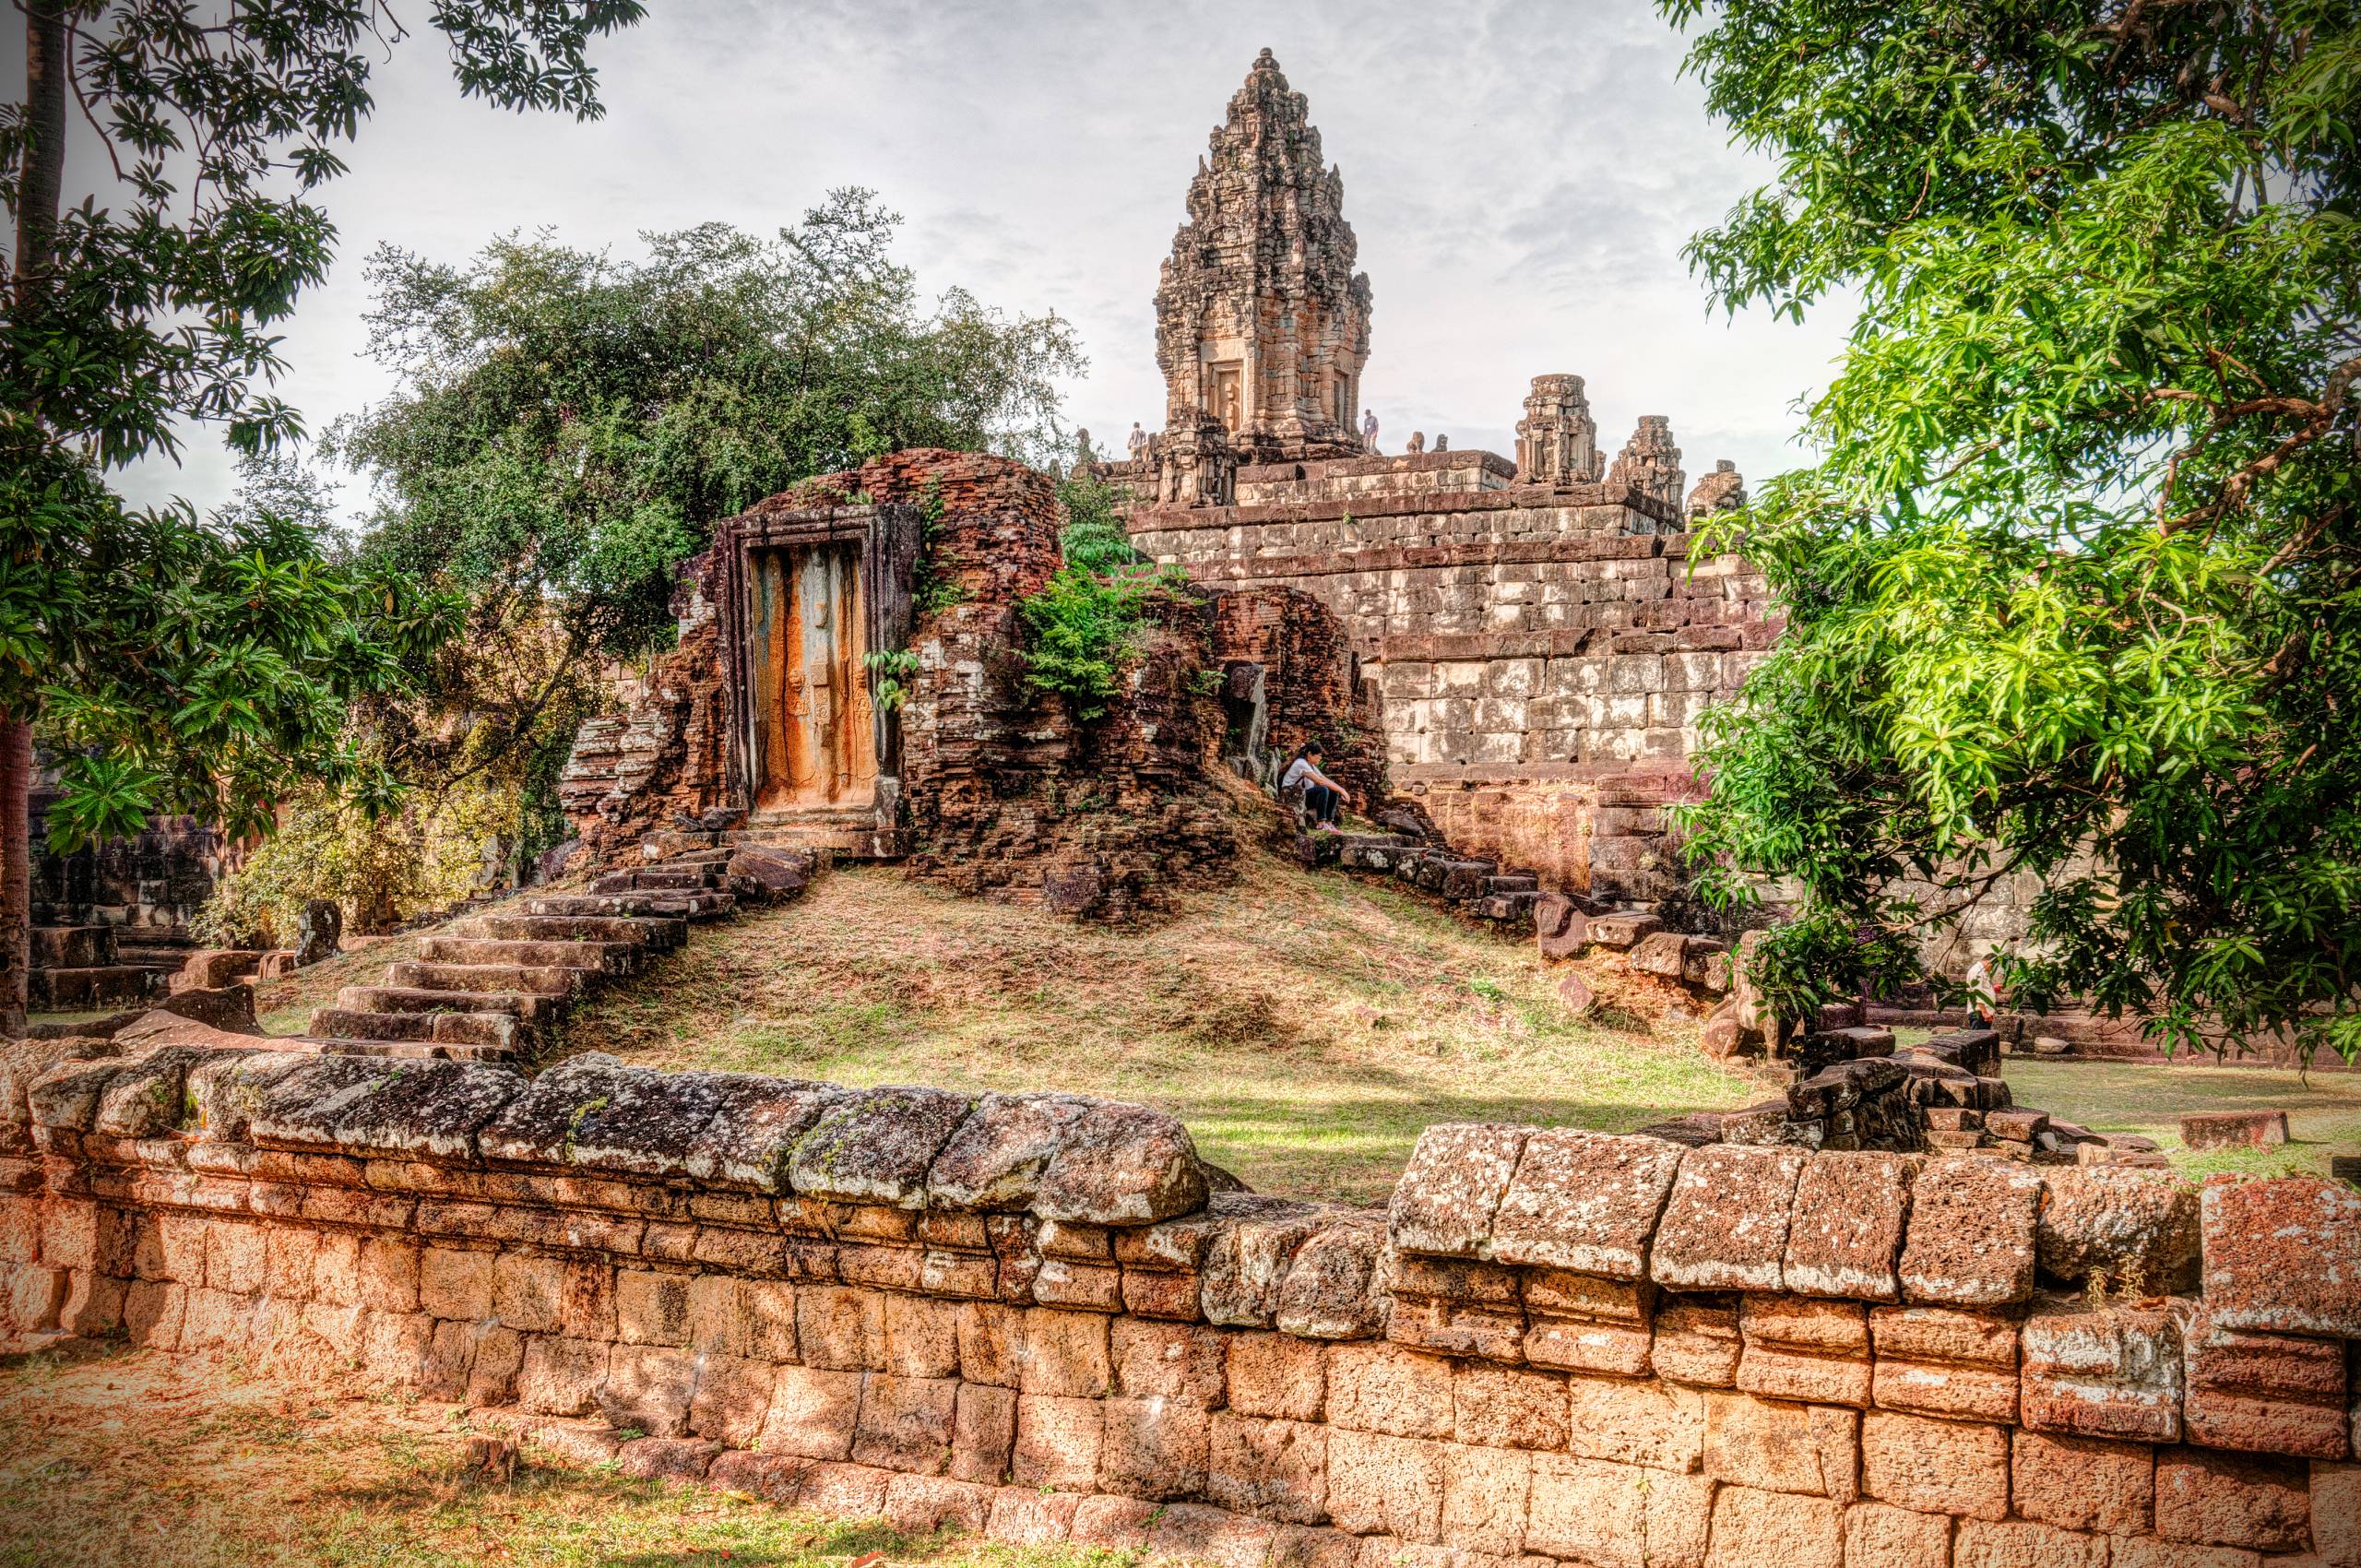 A photo of the Roluos Group of temples, located in a remote area of Angkor, featuring intricate stone carvings and towering spires.